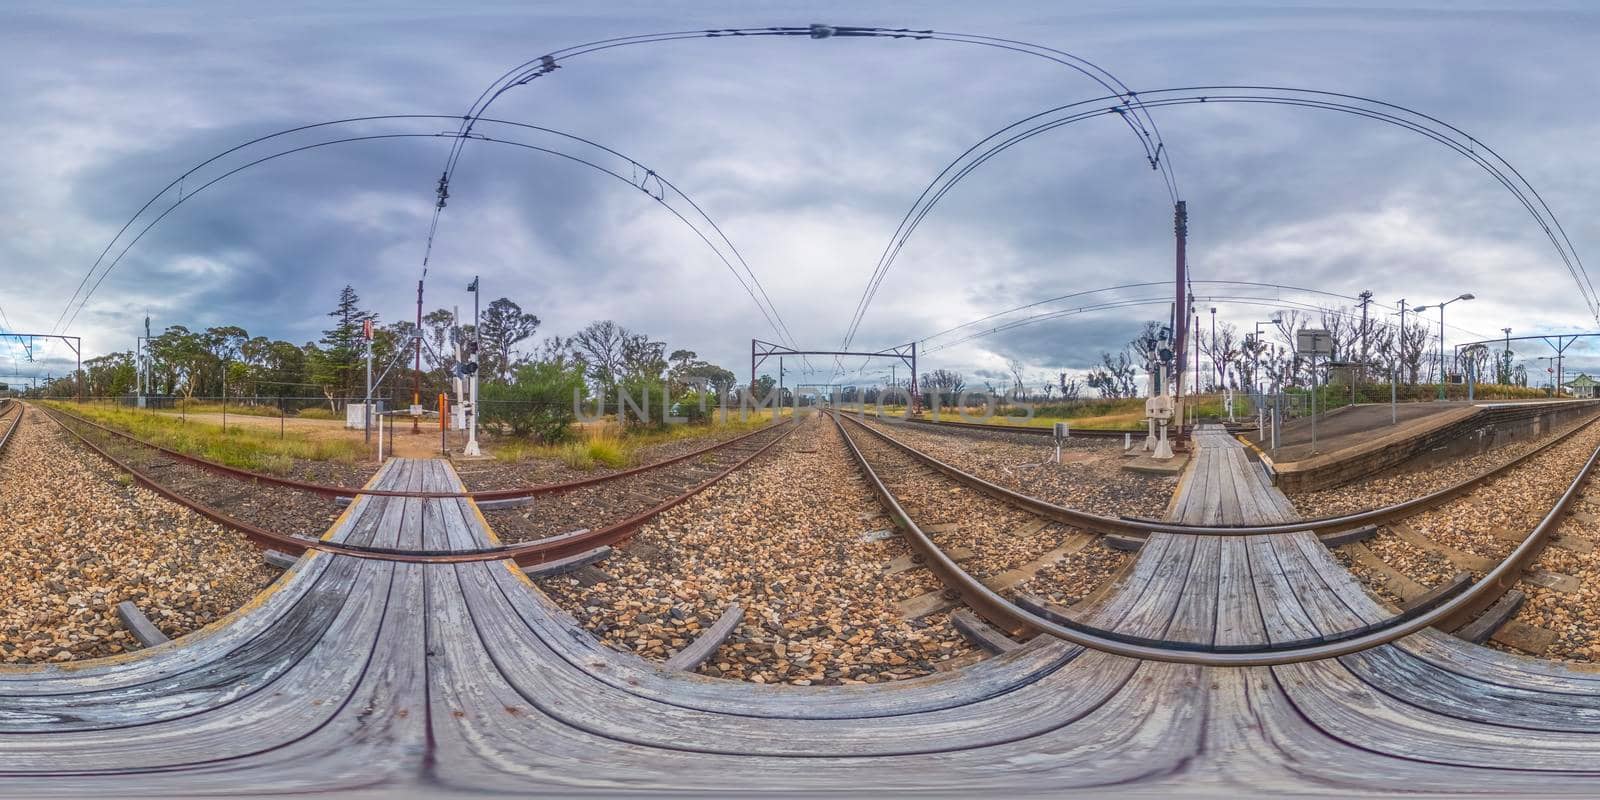 Spherical 360 panorama photograph of the Bell Railway Station in The Blue Mountains in regional New South Wales in Australia